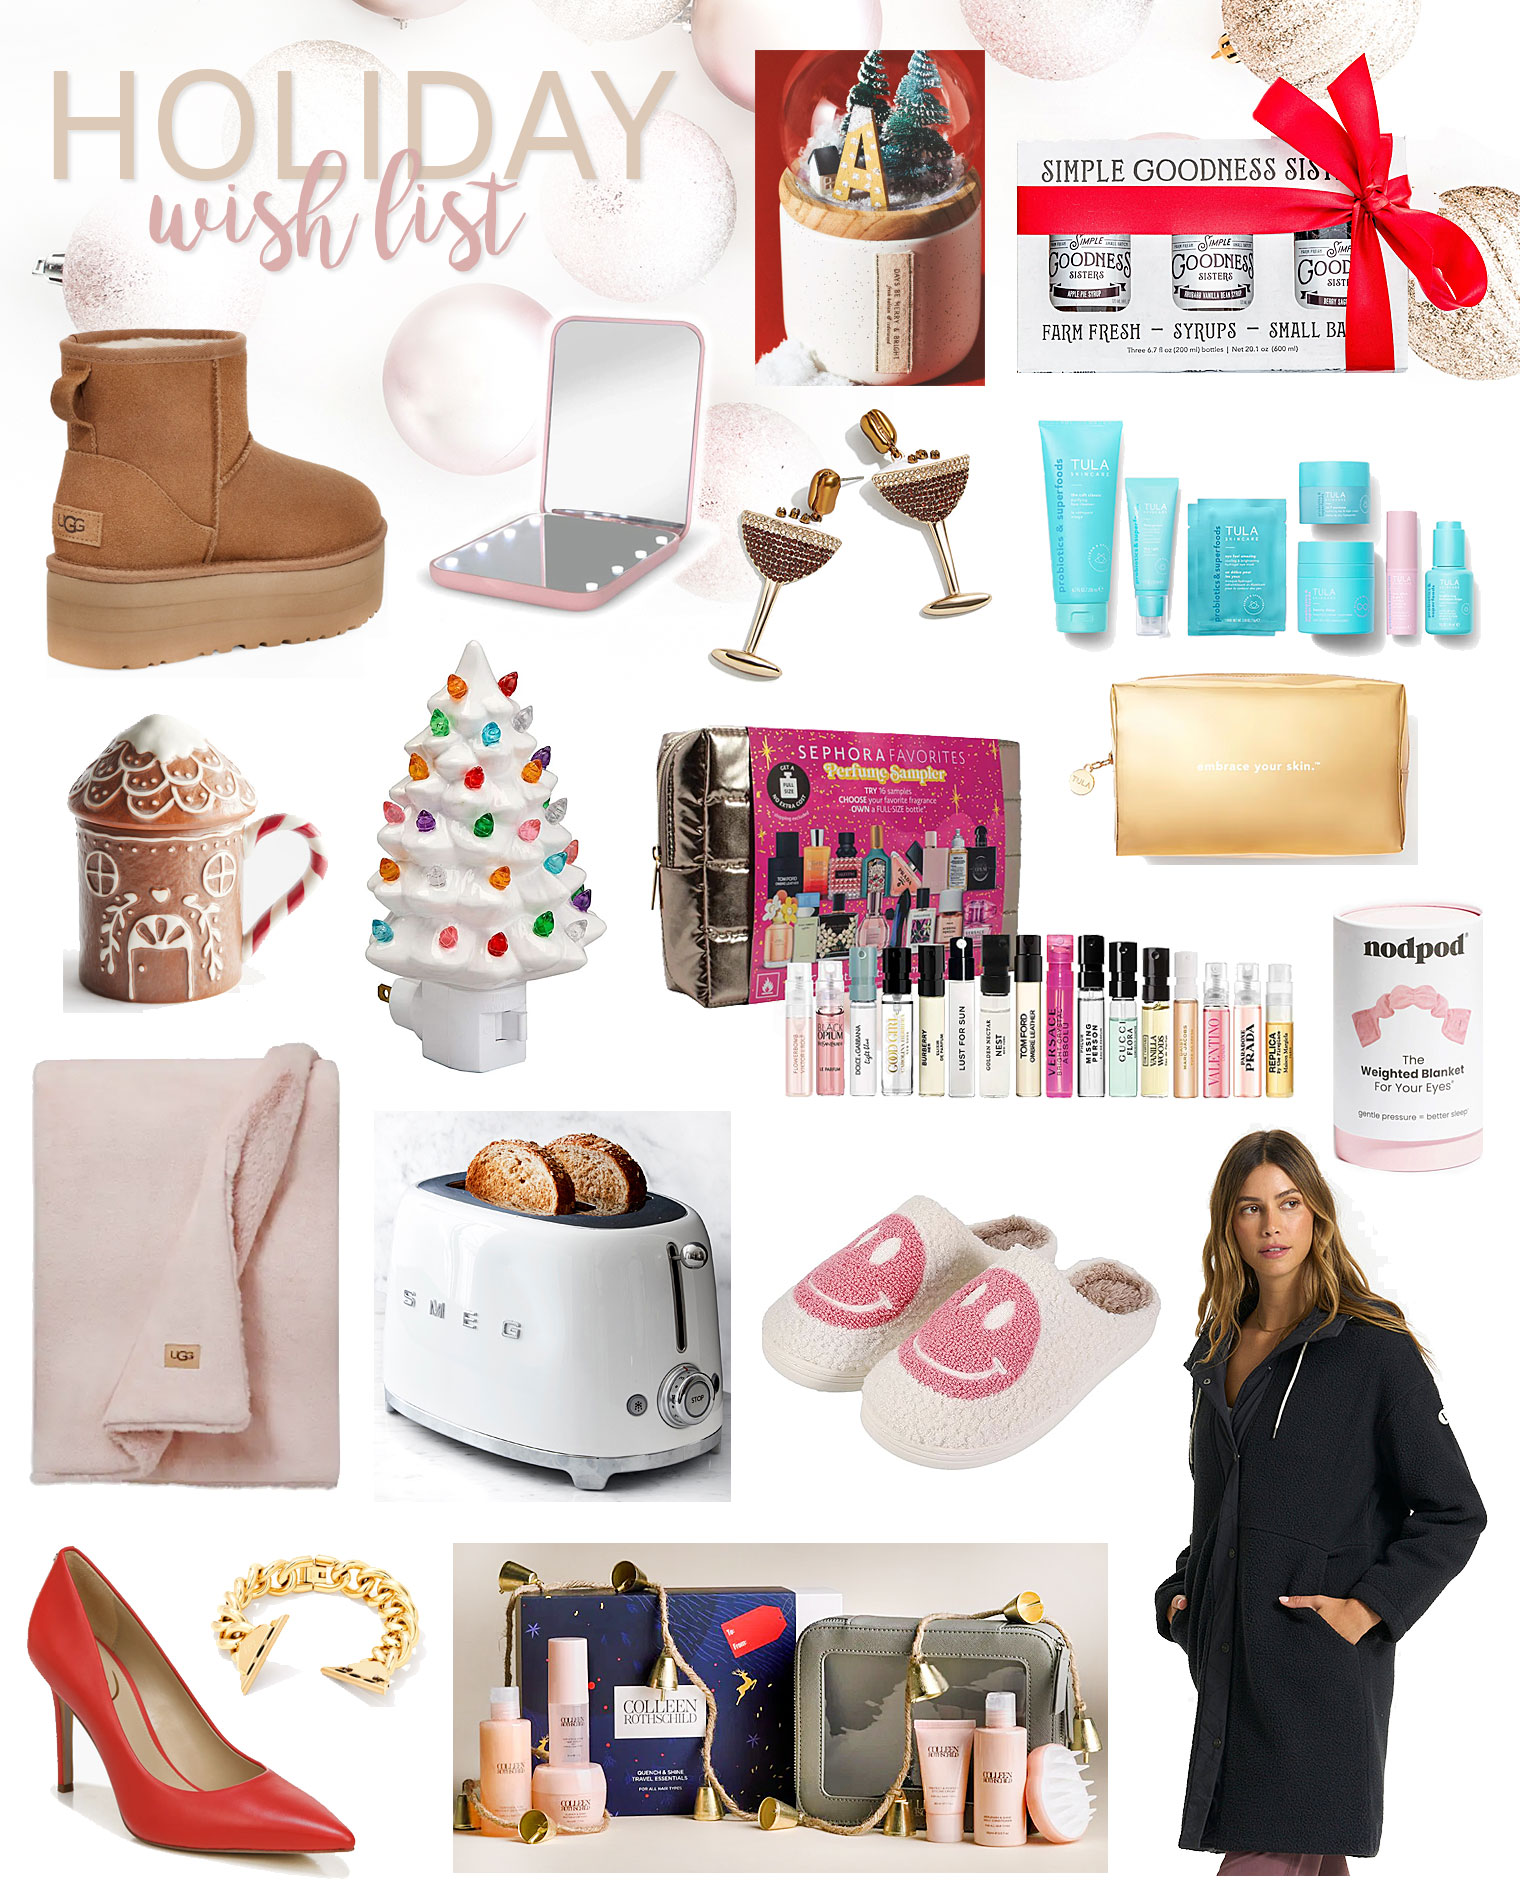 2022 Gift Guide for Her - Penny Pincher Fashion